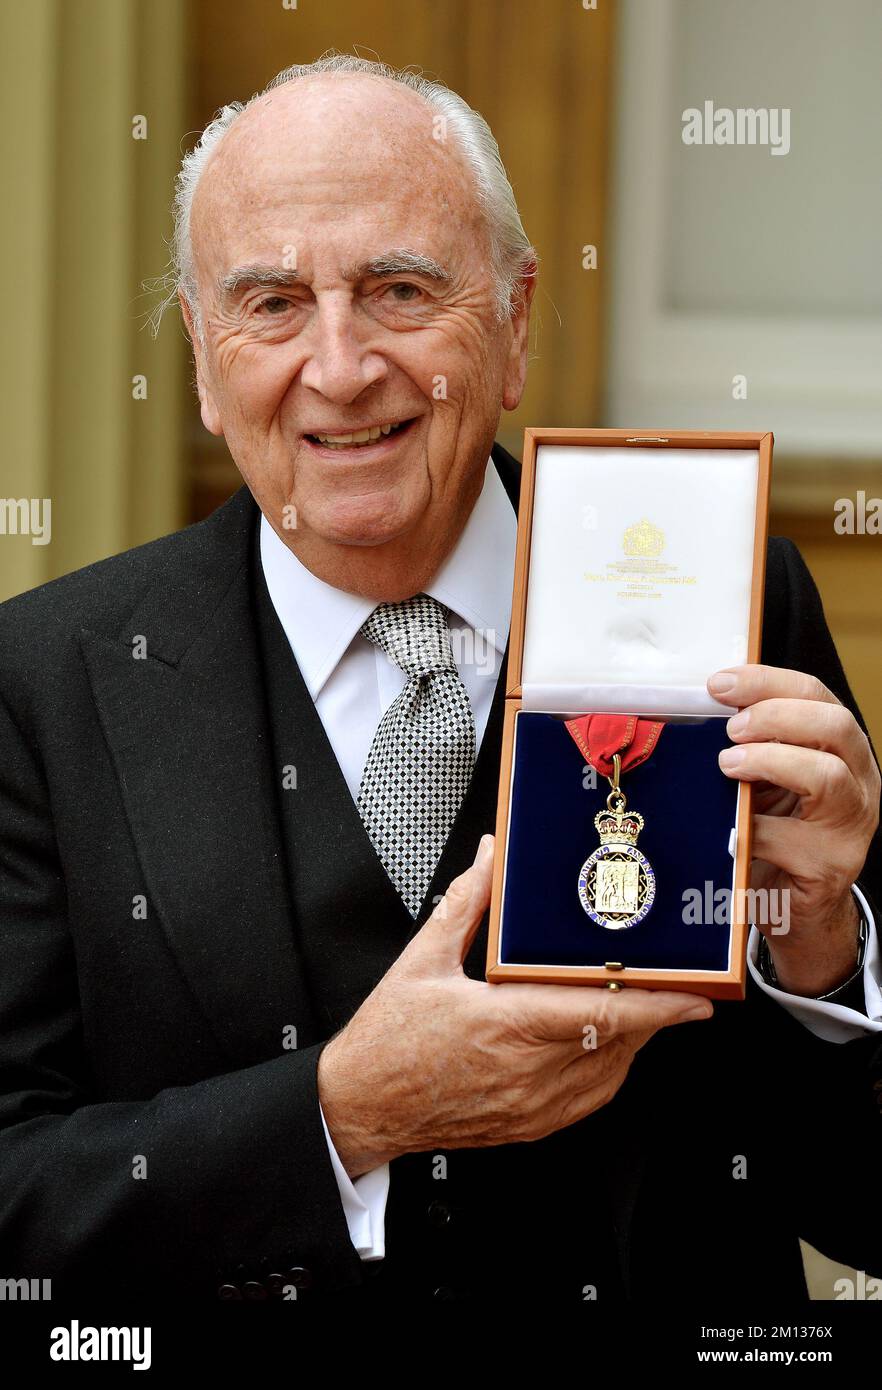 File photo dated 15/5/2015 of Lord Young of Graffham holds his insignia of member of the Order of the Companions of Honour after it was presented to him by the Prince of Wales, at the Investiture ceremony in Buckingham Palace in central London. Lord Young of Graffham, a Cabinet minister under Margaret Thatcher and a successful businessman, has died aged 90. A Conservative peer, he became secretary of state for employment in 1985, before being appointed secretary of state for trade and industry after the 1987 election. Issue date: Friday December 9, 2022. Stock Photo